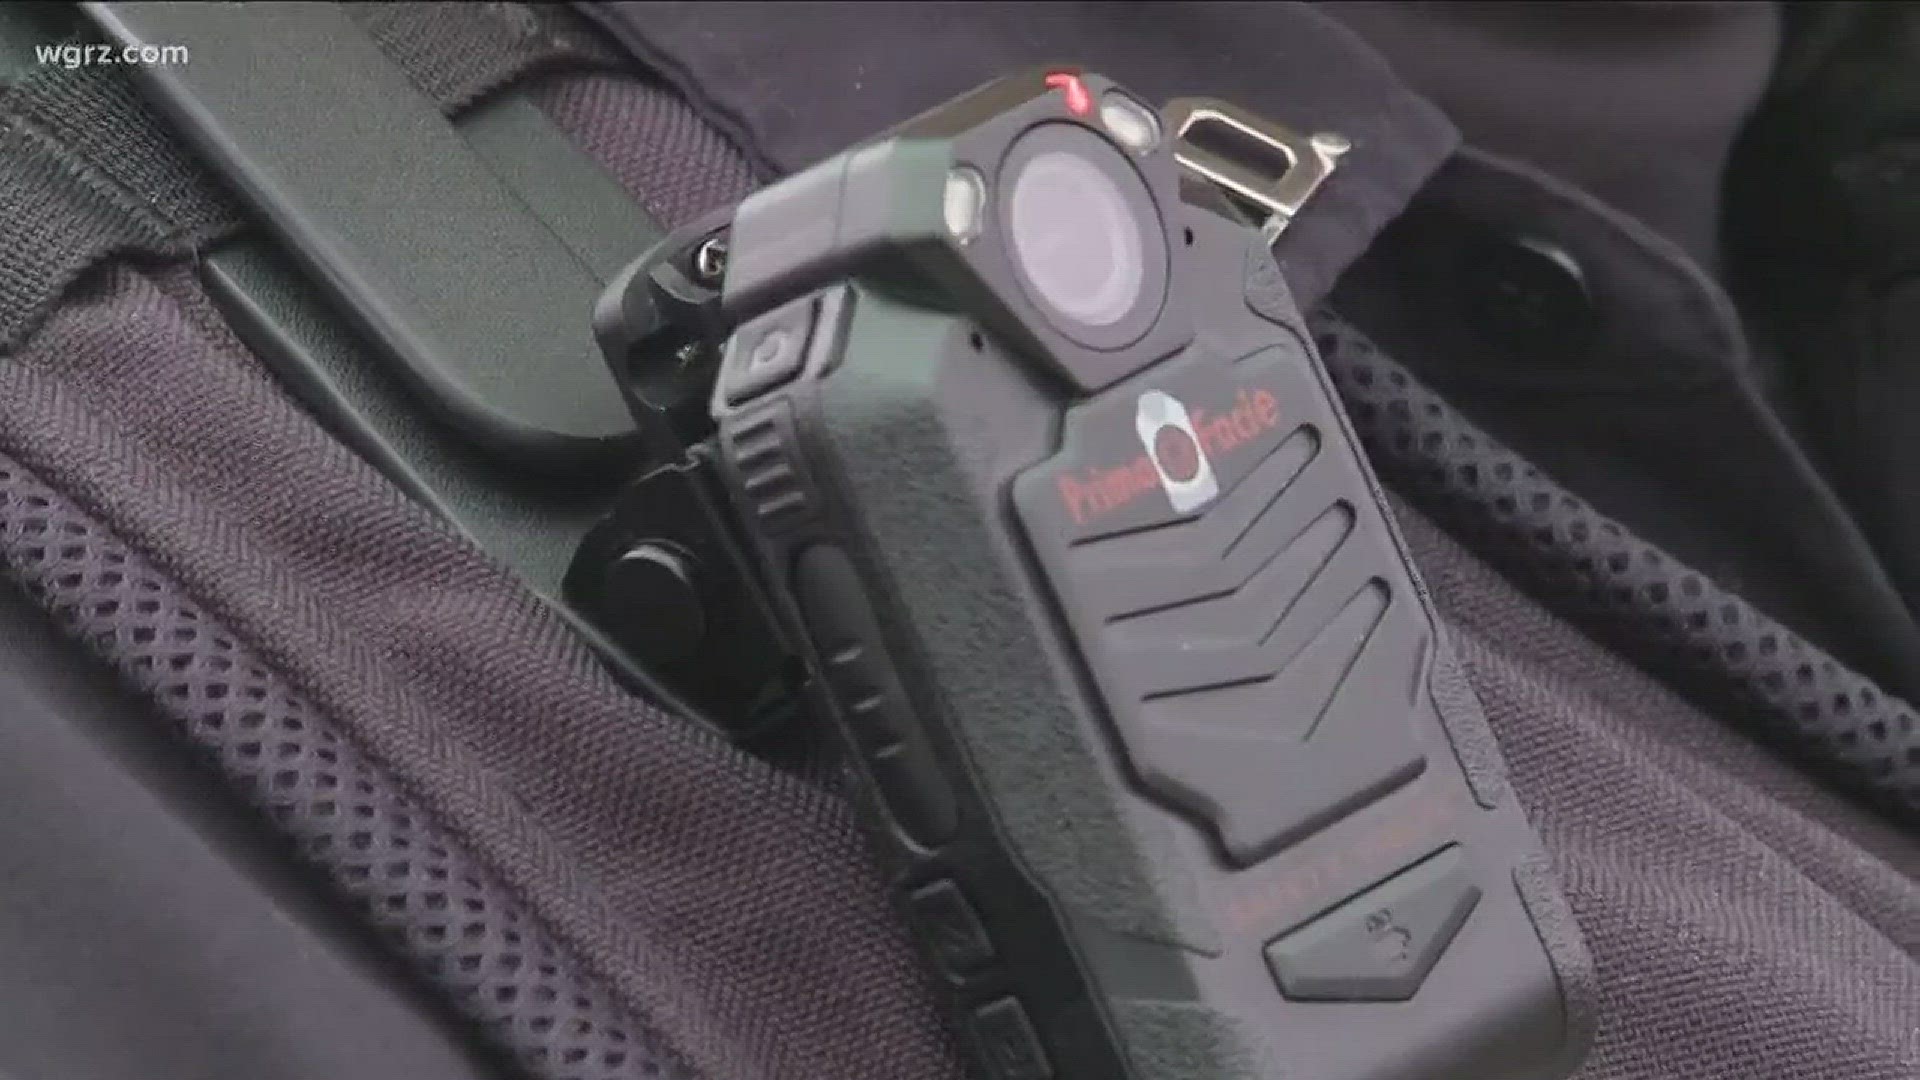 The Buffalo Police Department introduced its pilot body cam program Sunday during the St. Paddy's Day Parade.